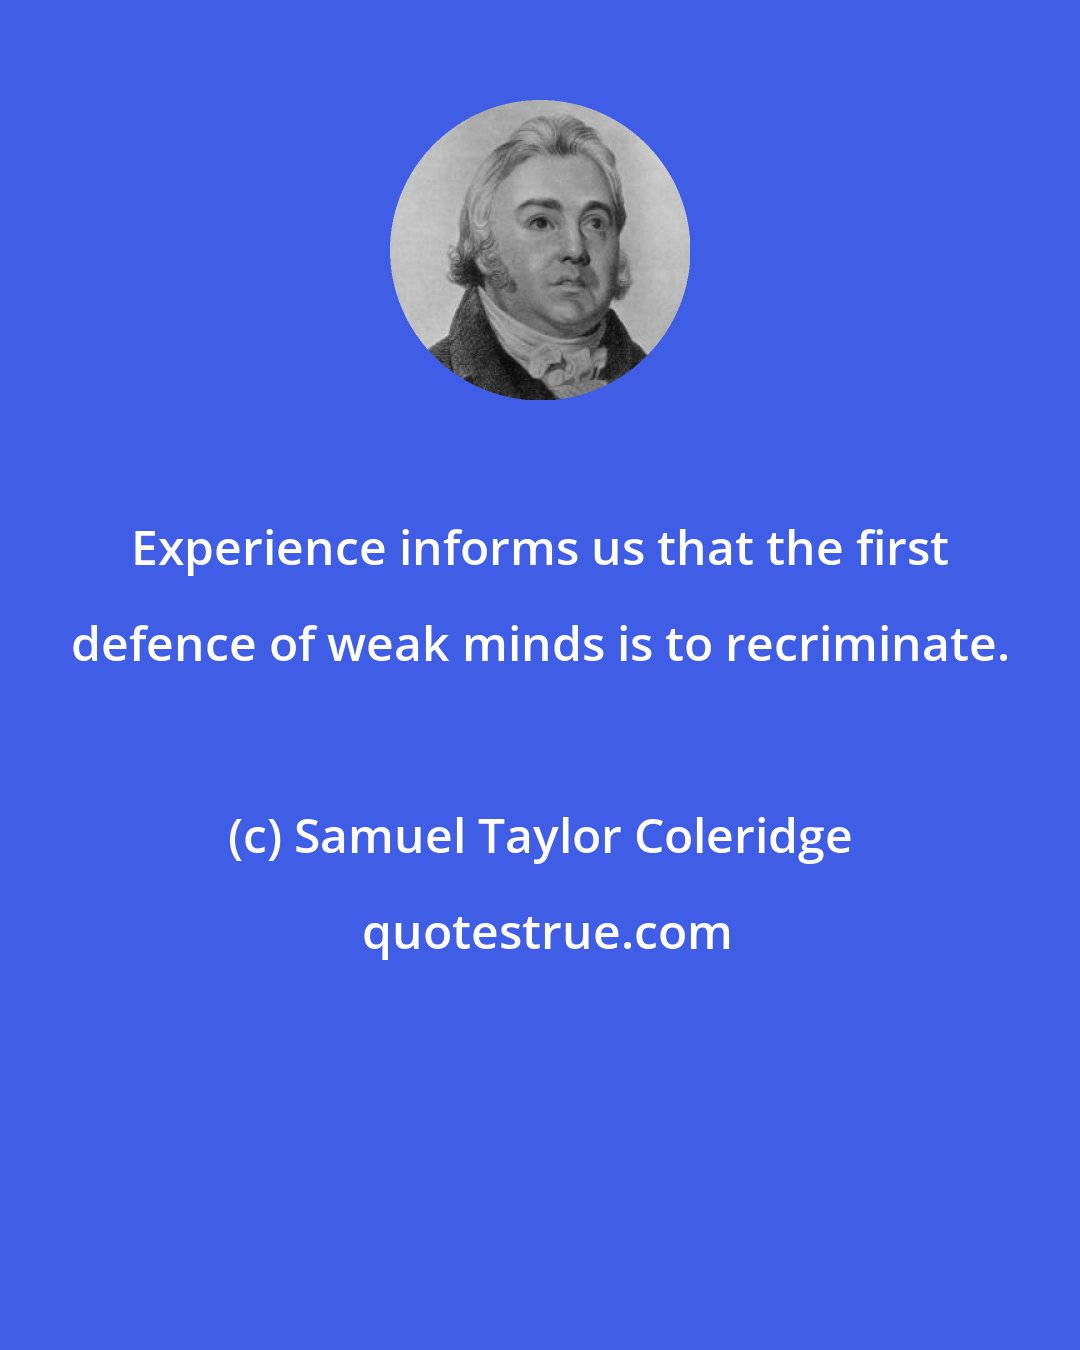 Samuel Taylor Coleridge: Experience informs us that the first defence of weak minds is to recriminate.